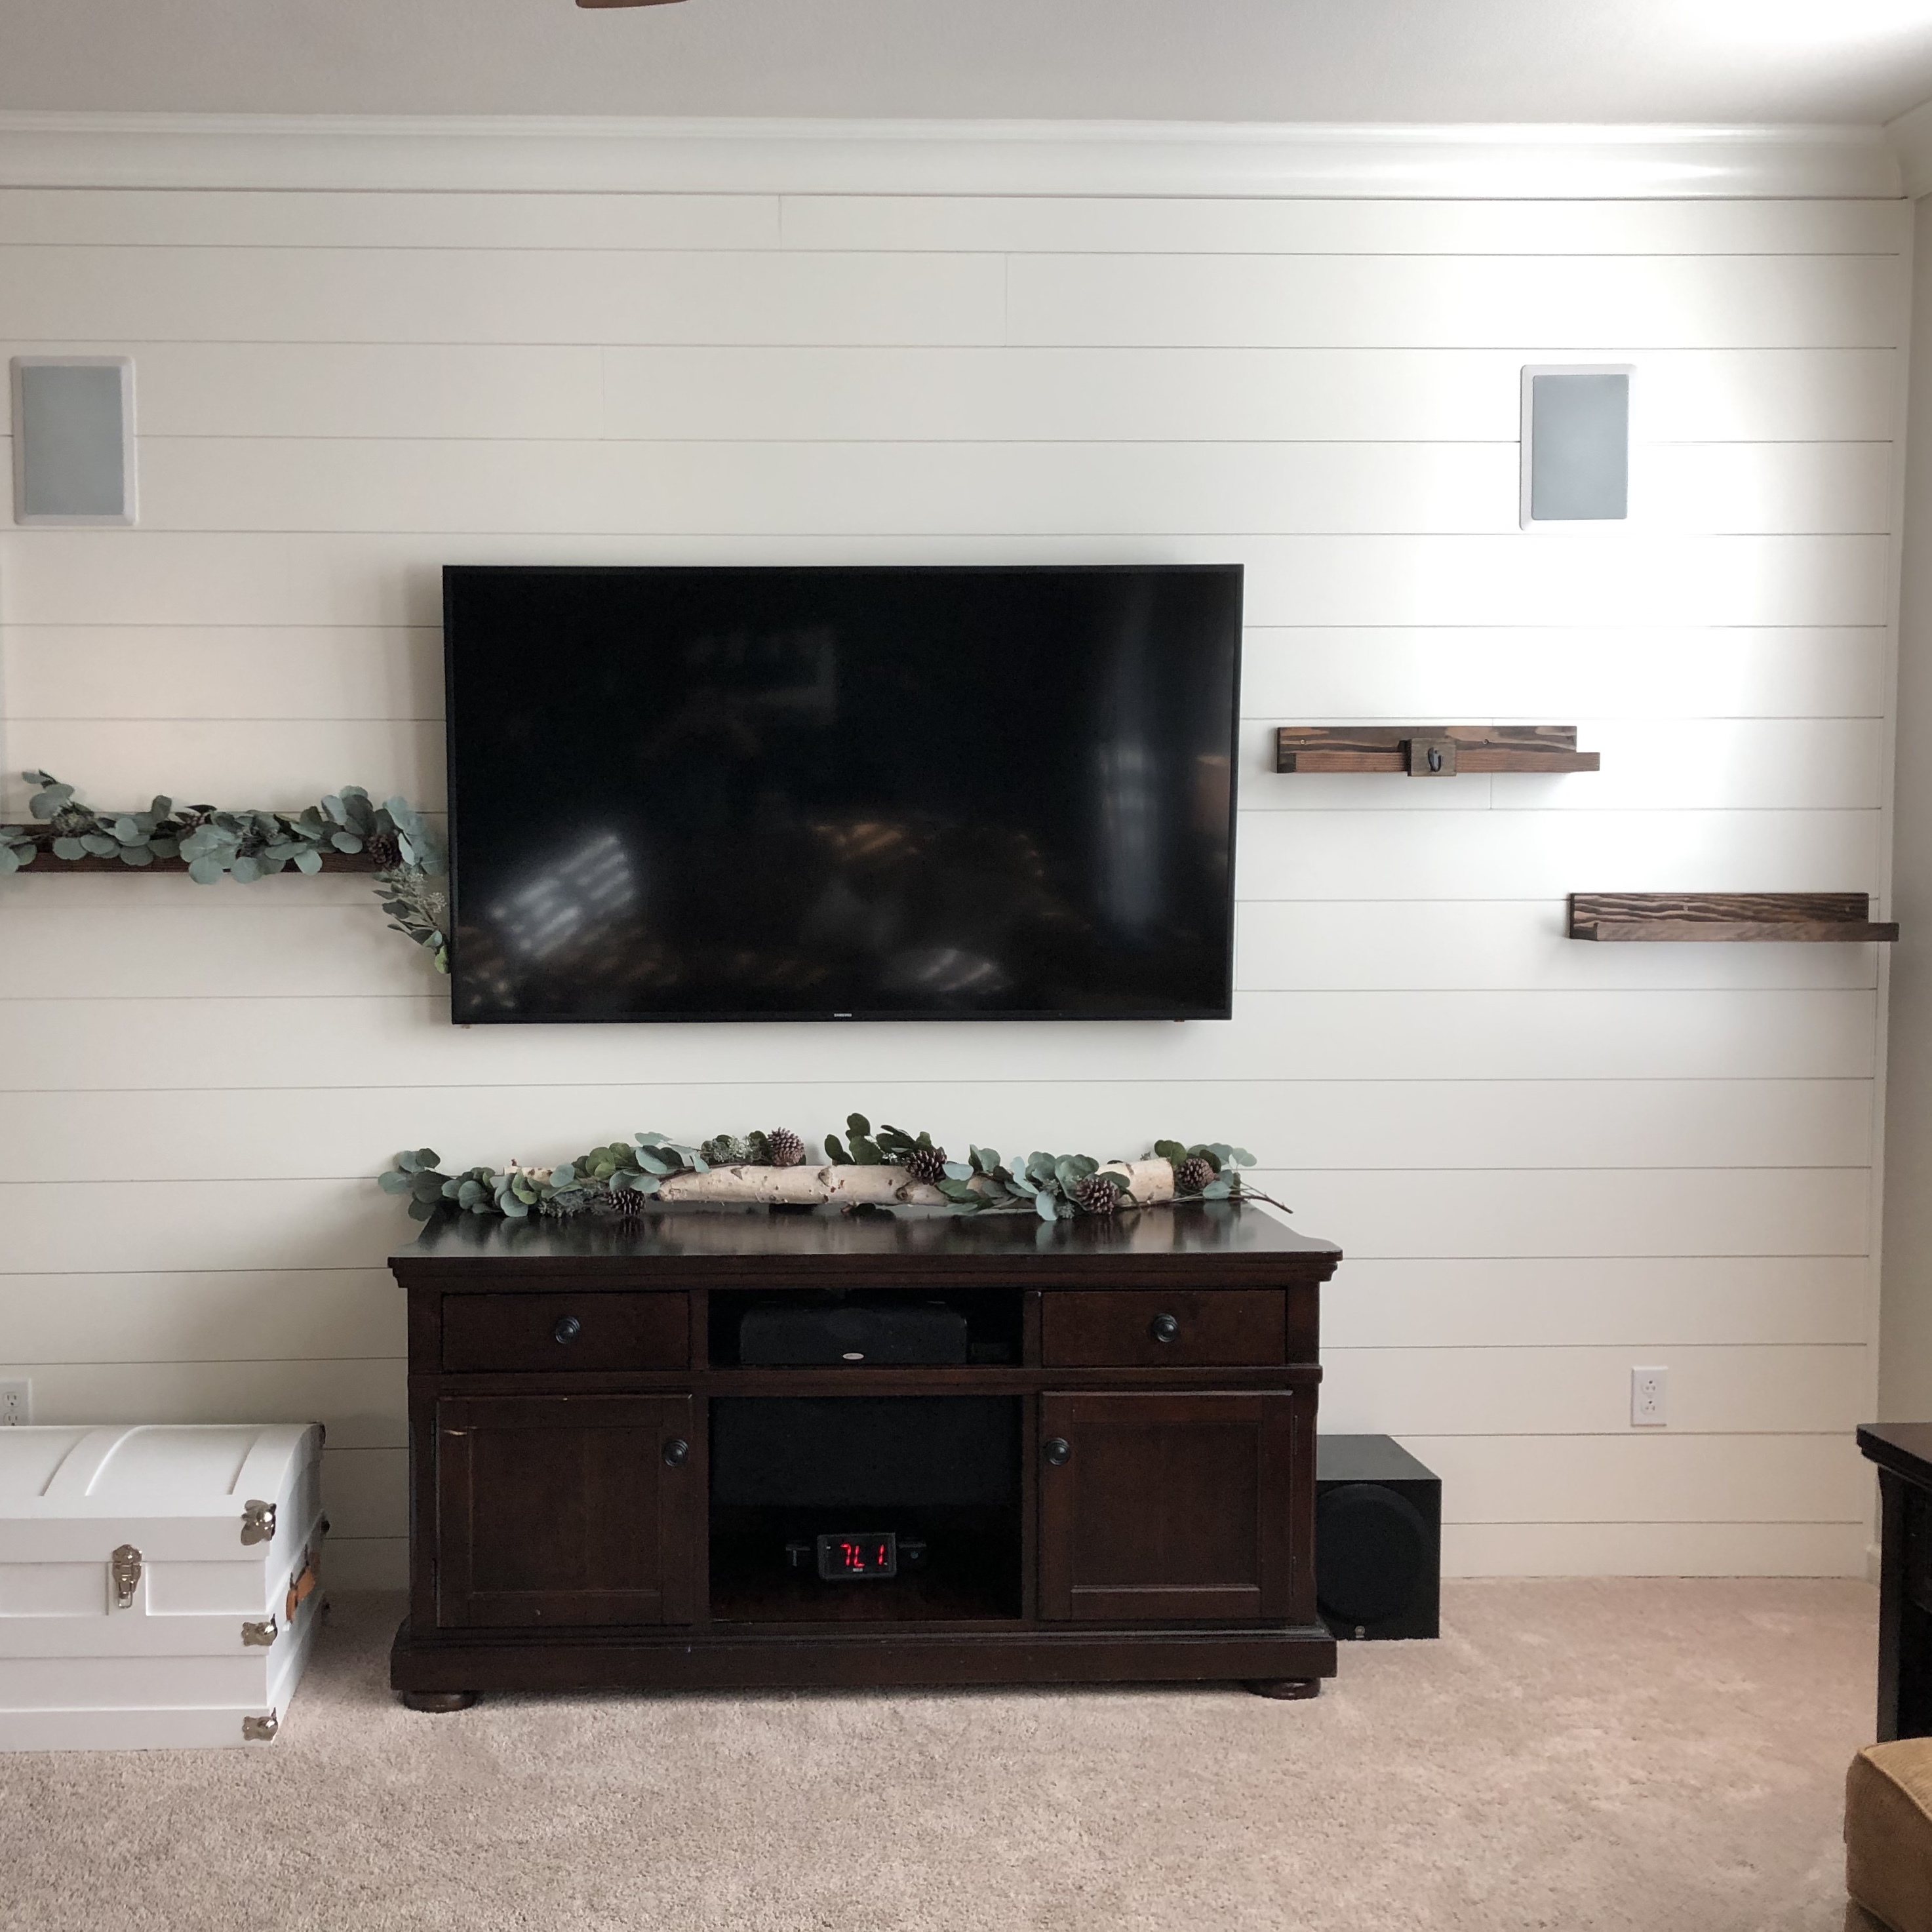 Shiplap Wall with Floating Shelves